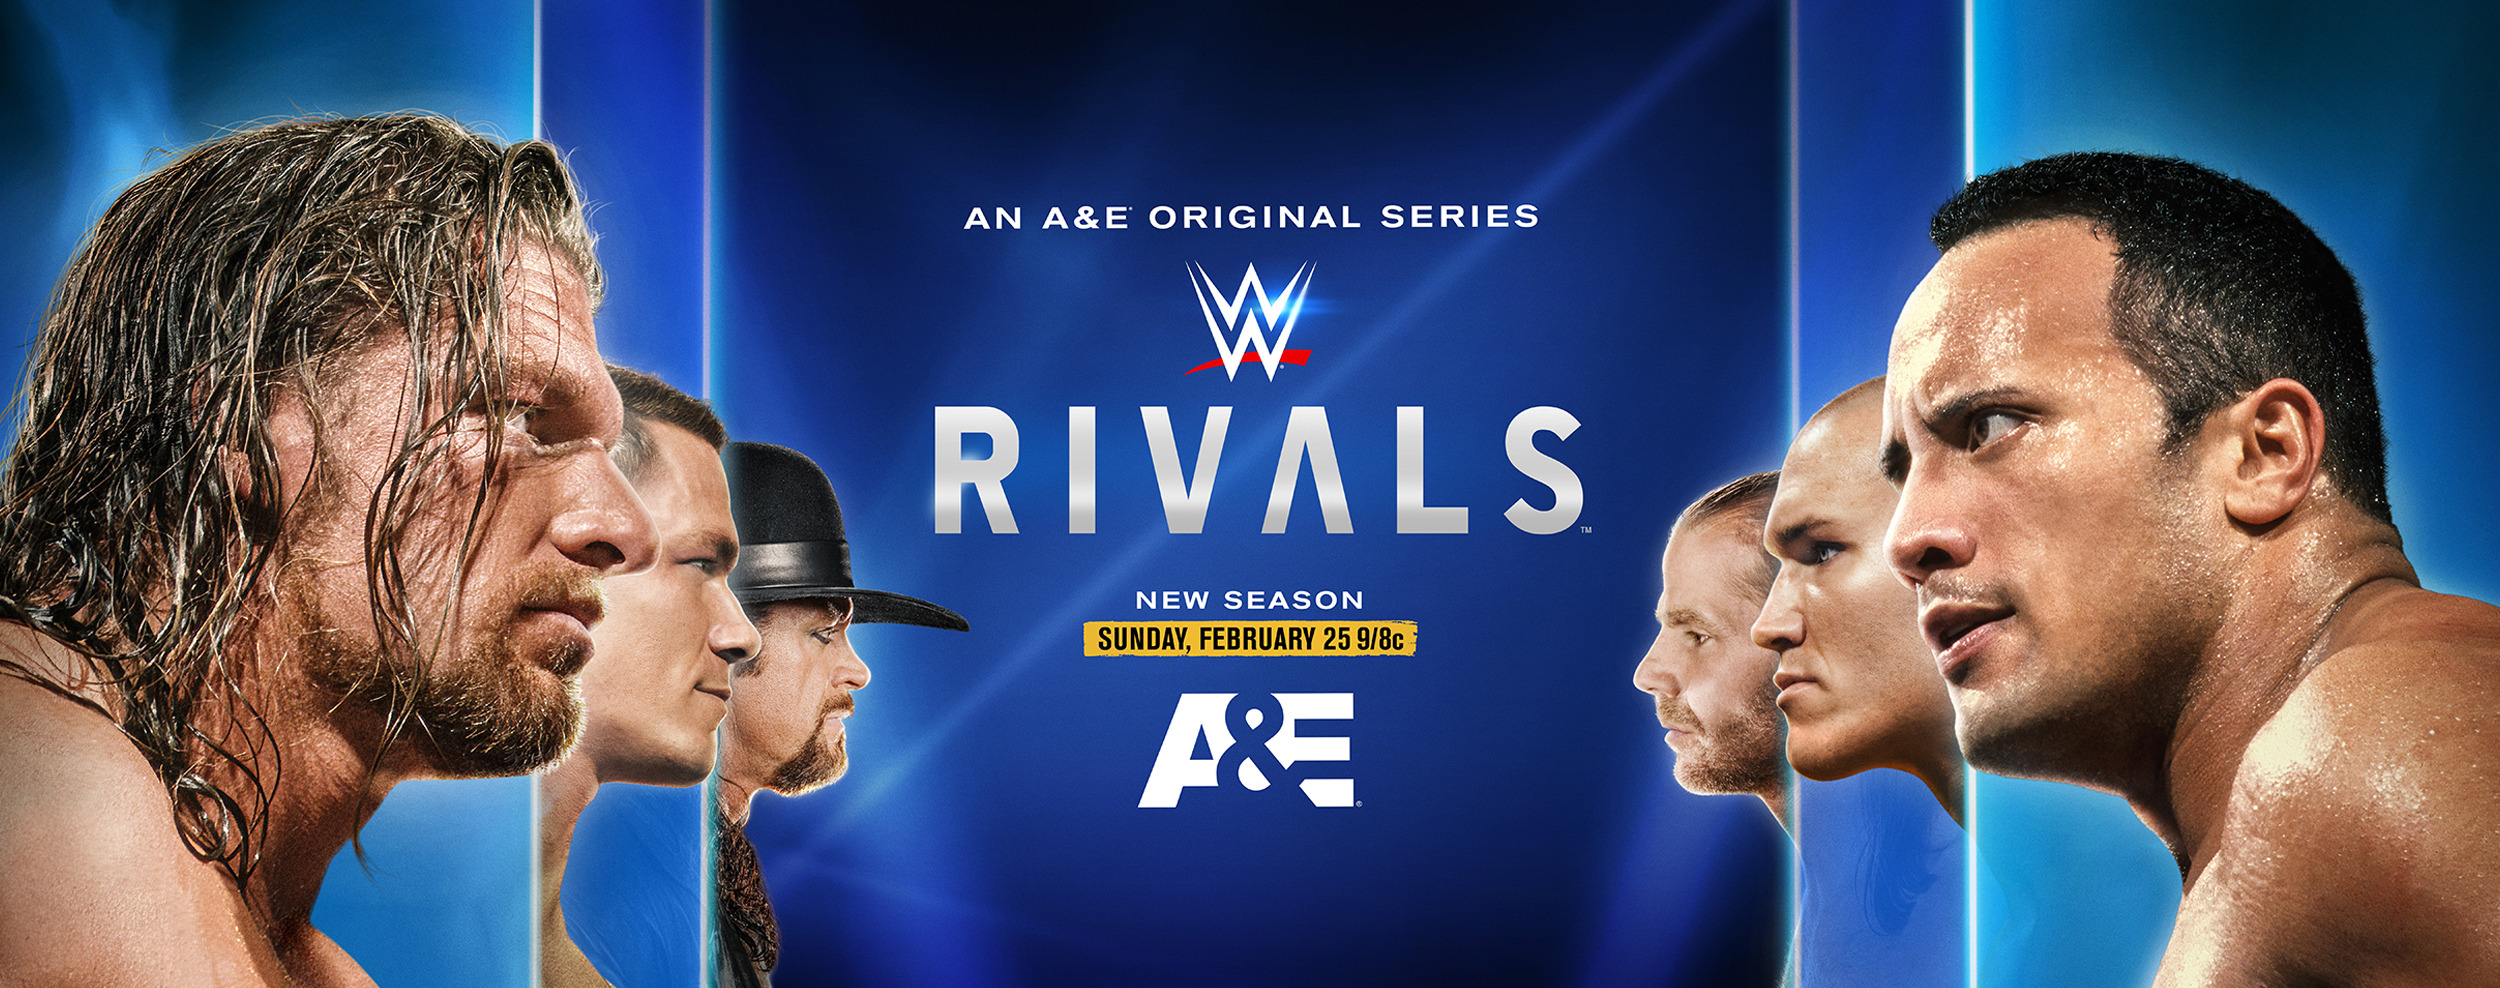 Mega Sized TV Poster Image for WWE Rivals (#4 of 6)